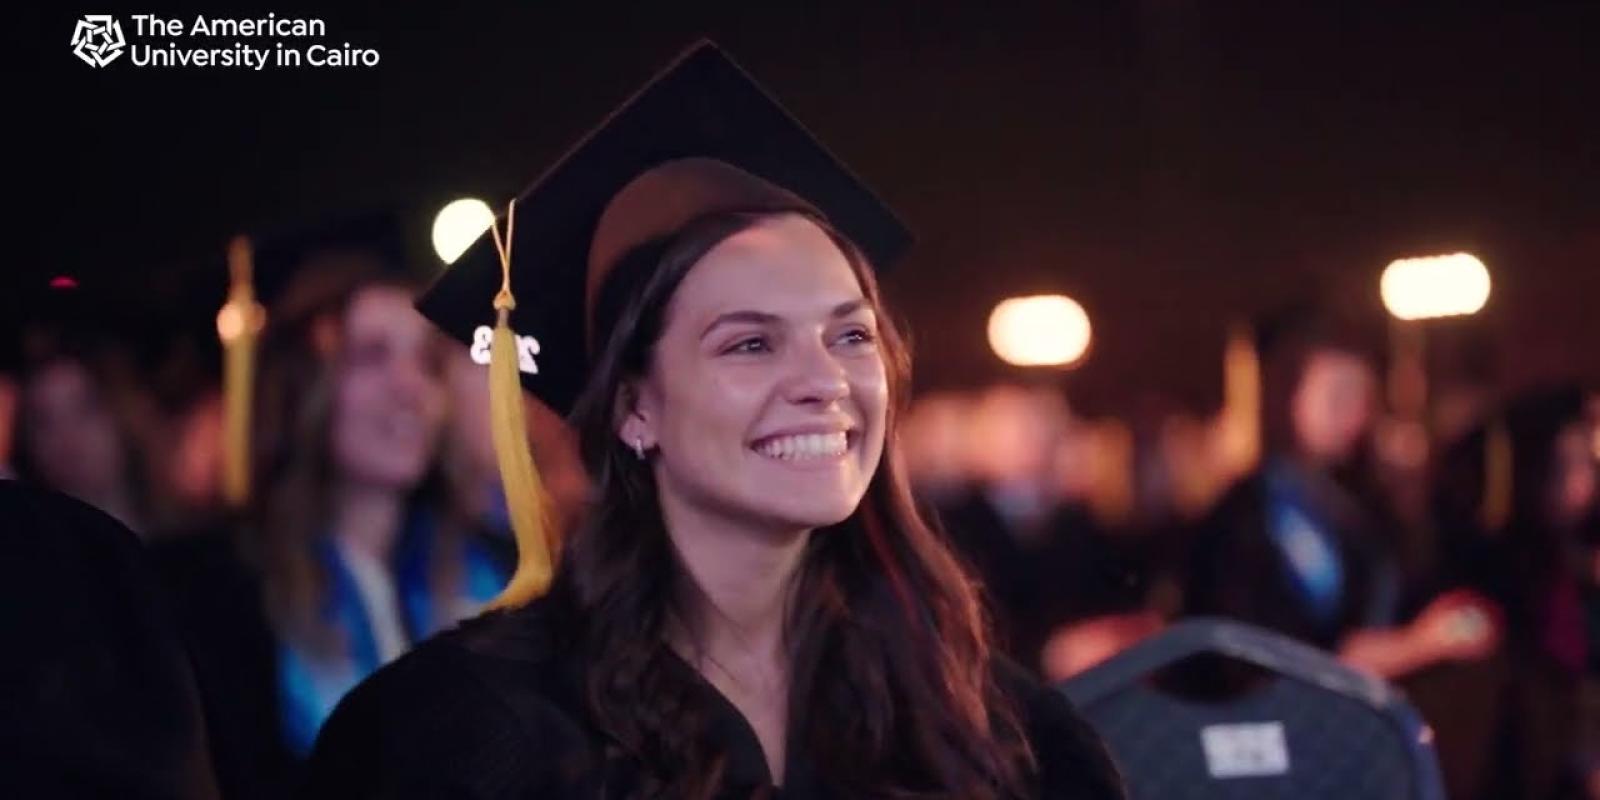 A female is smiling and wearing her cap and gown during graduation